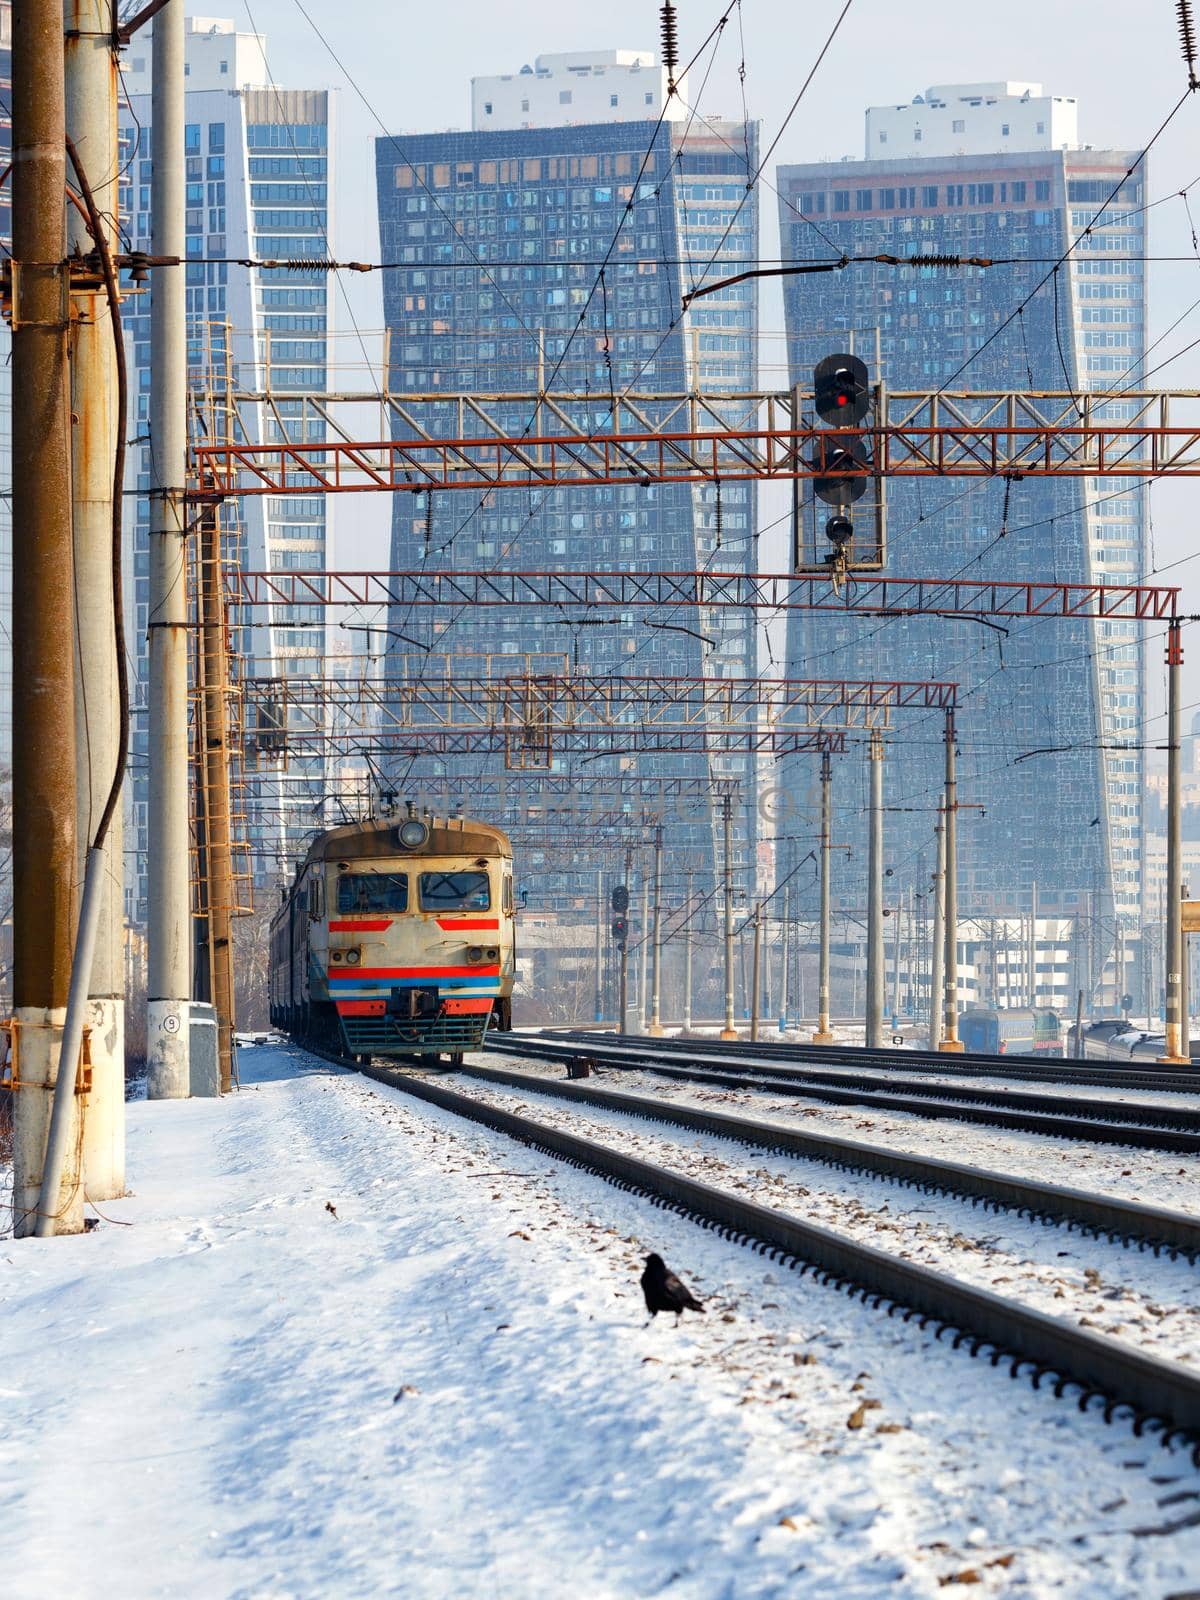 An electric train moves on rails against the backdrop of a cityscape in a winter haze, vertical image.